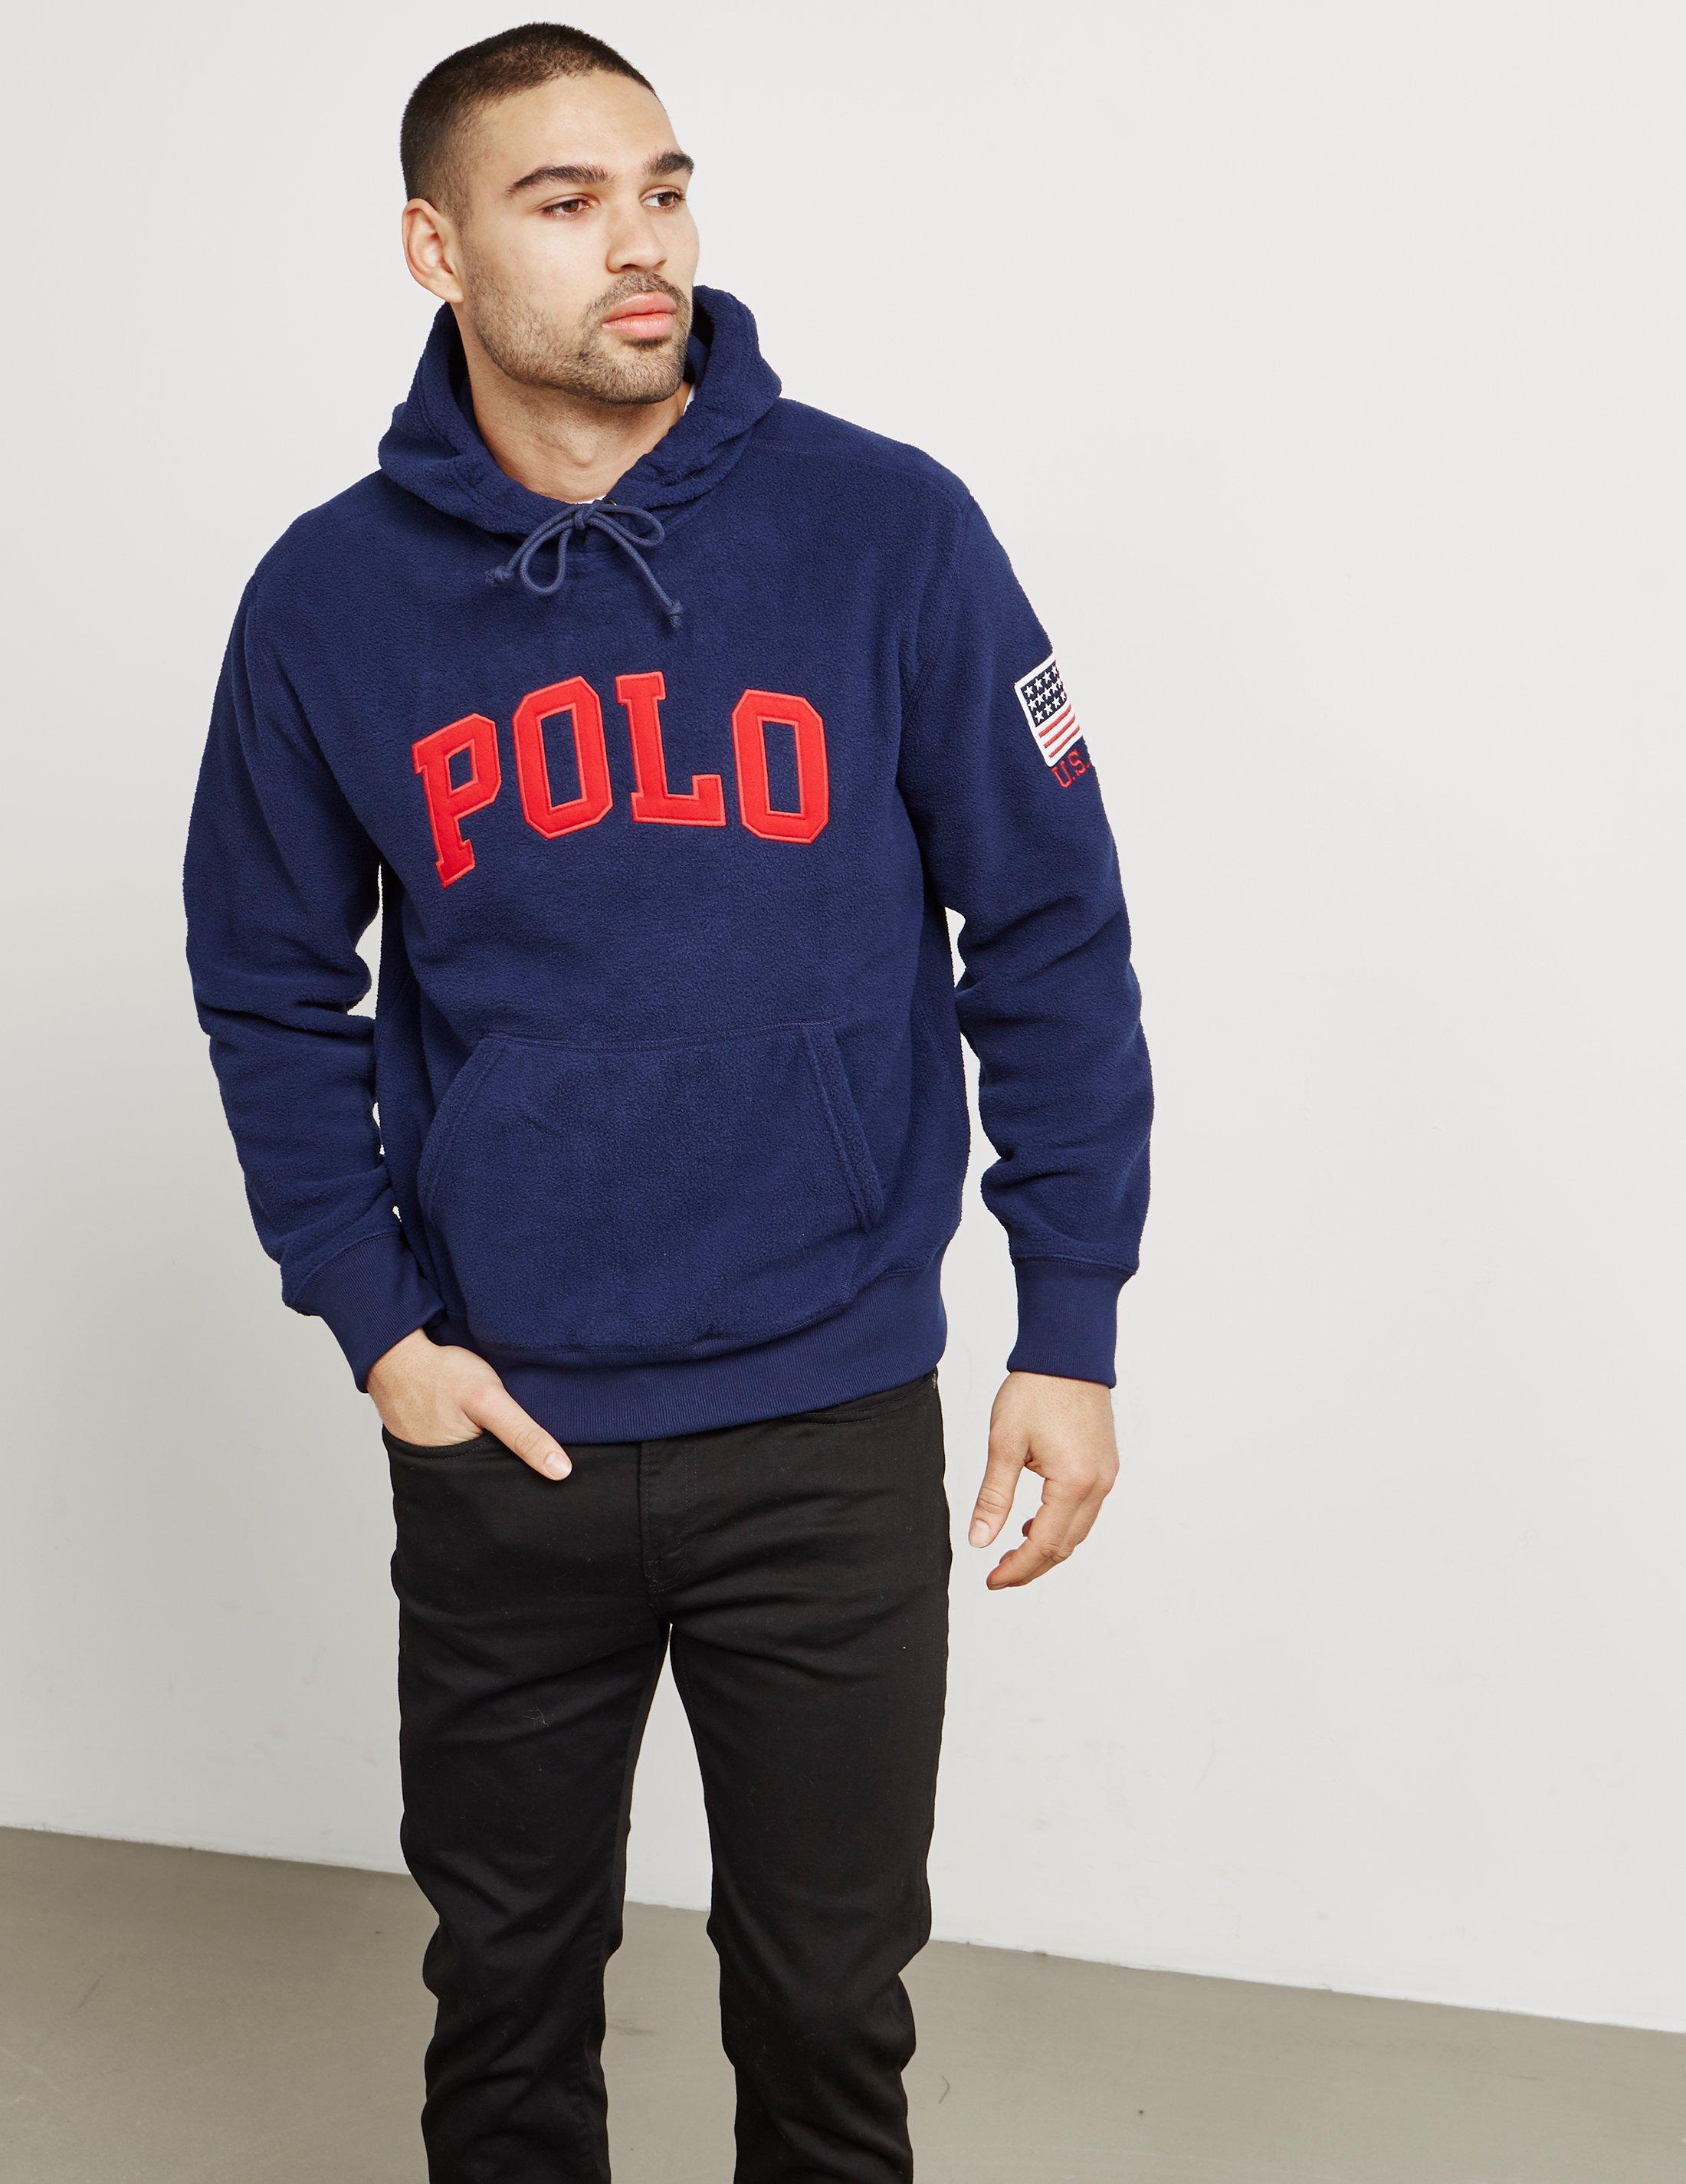 navy blue and red polo hoodie